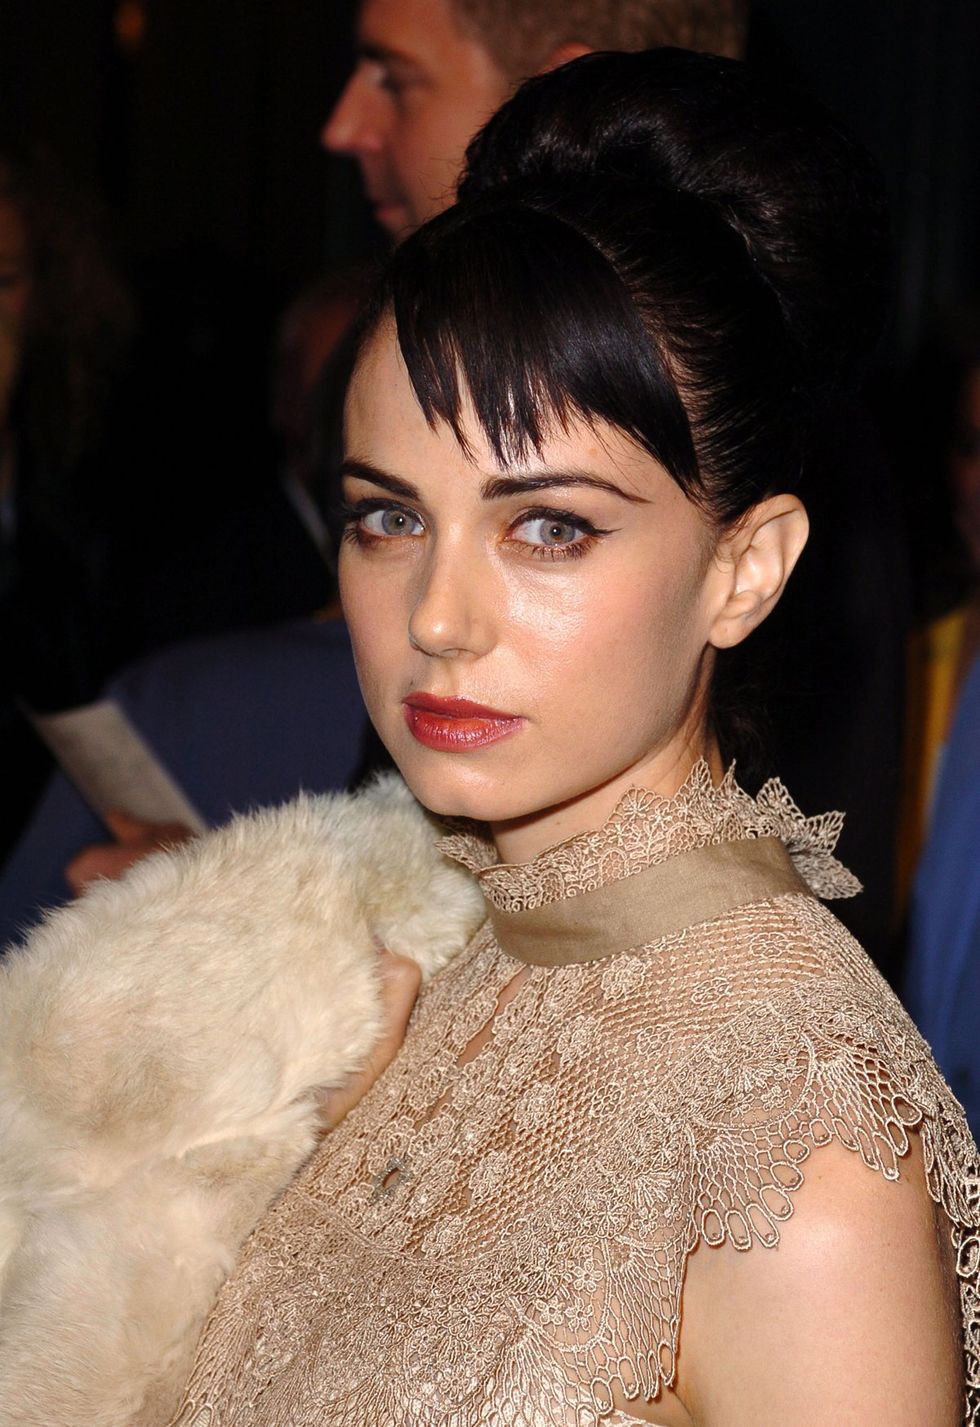 Photo Gallery L Word Showtime Premier Event 2004 Mia Kirshner